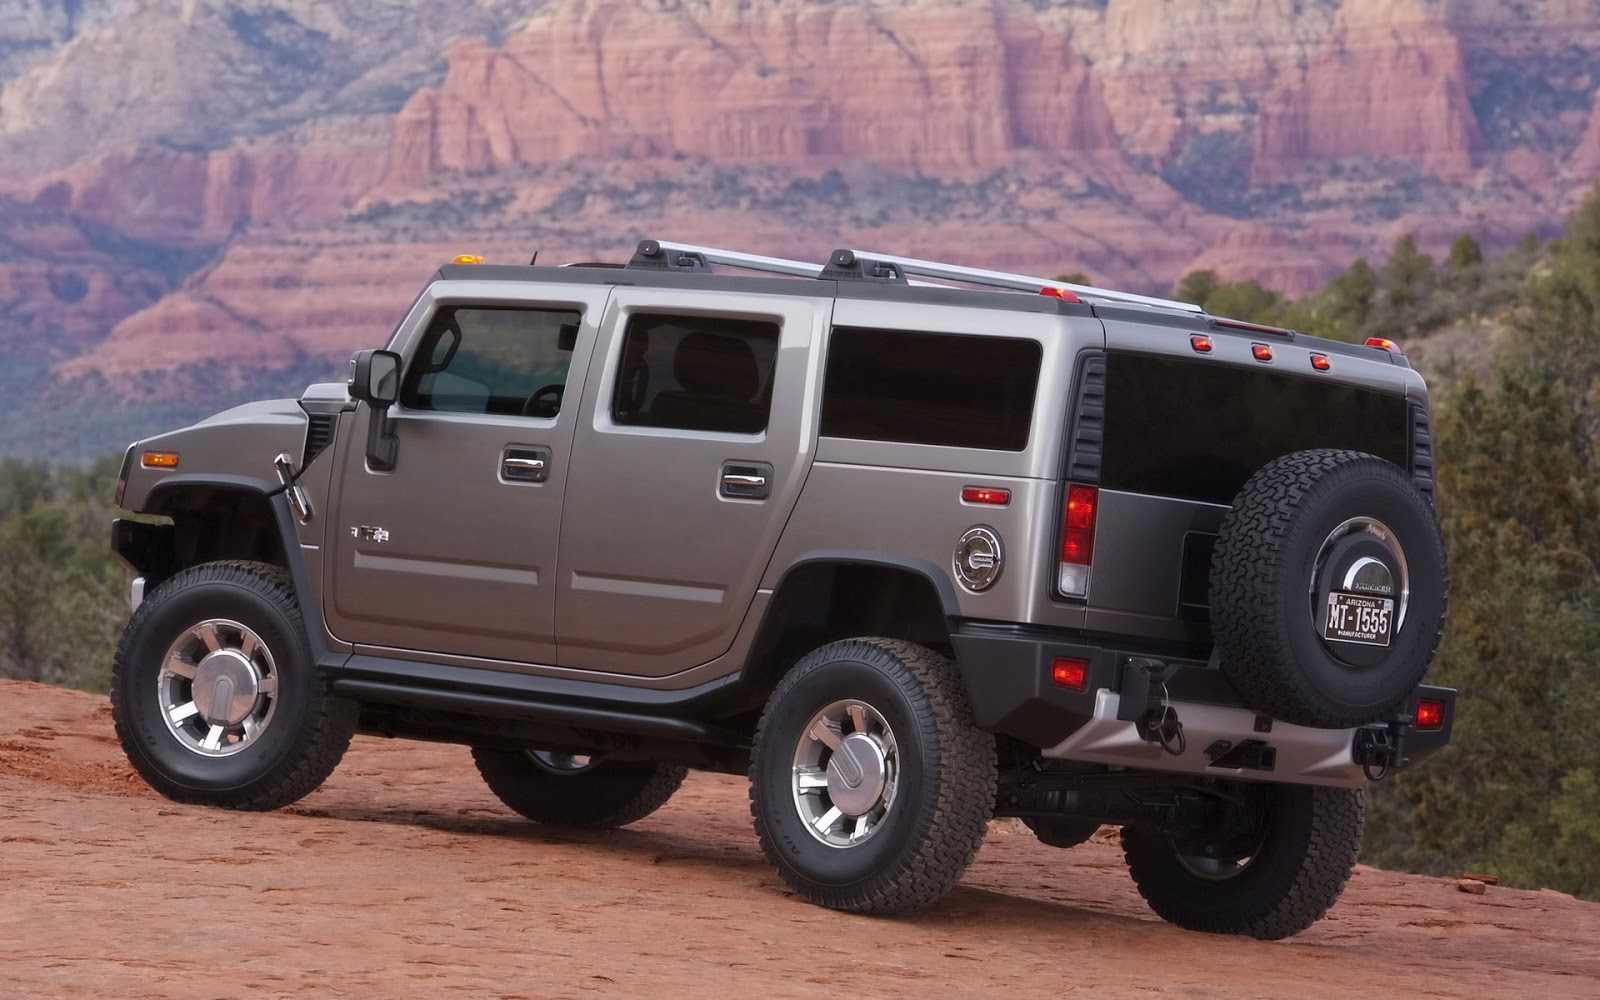 Hot cars: hummer best wallpapers H2 army hummer H3